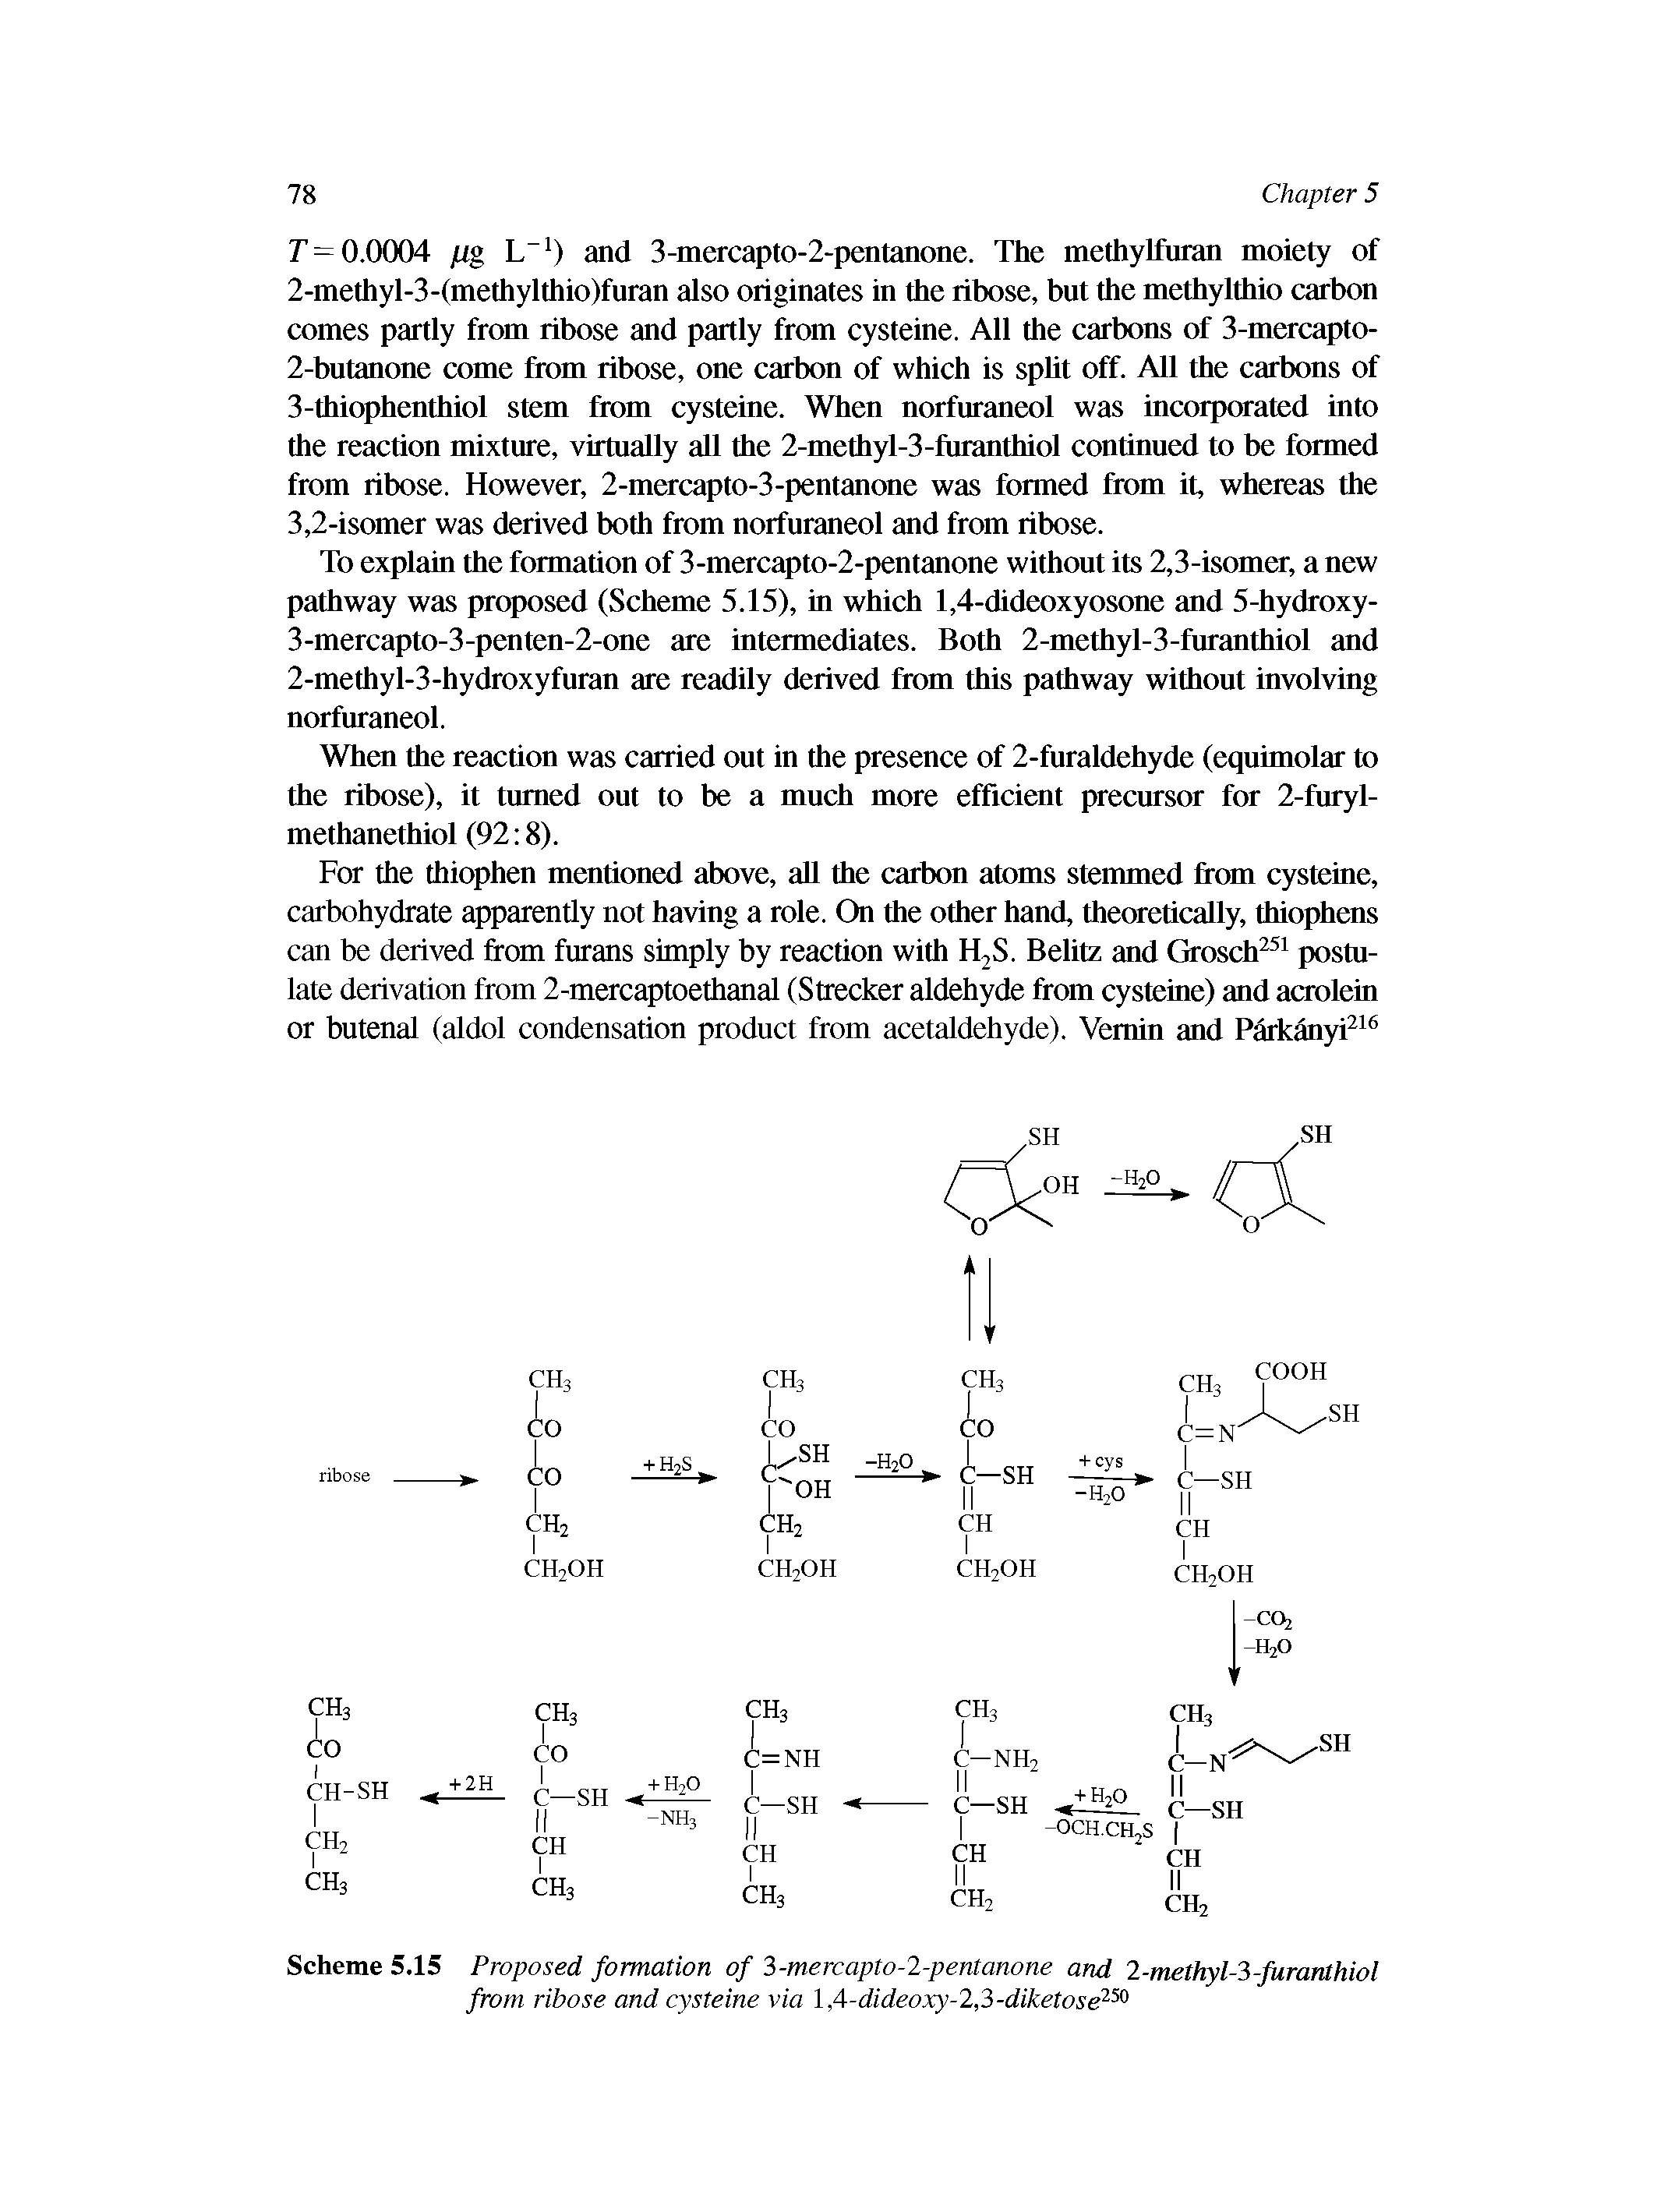 Scheme 5.15 Proposed formation of 3-mercapto-2-pentanone and 2-methyl-3-furanthiol from ribose and cysteine via l,4-dideoxy-2,3-diketose2X...